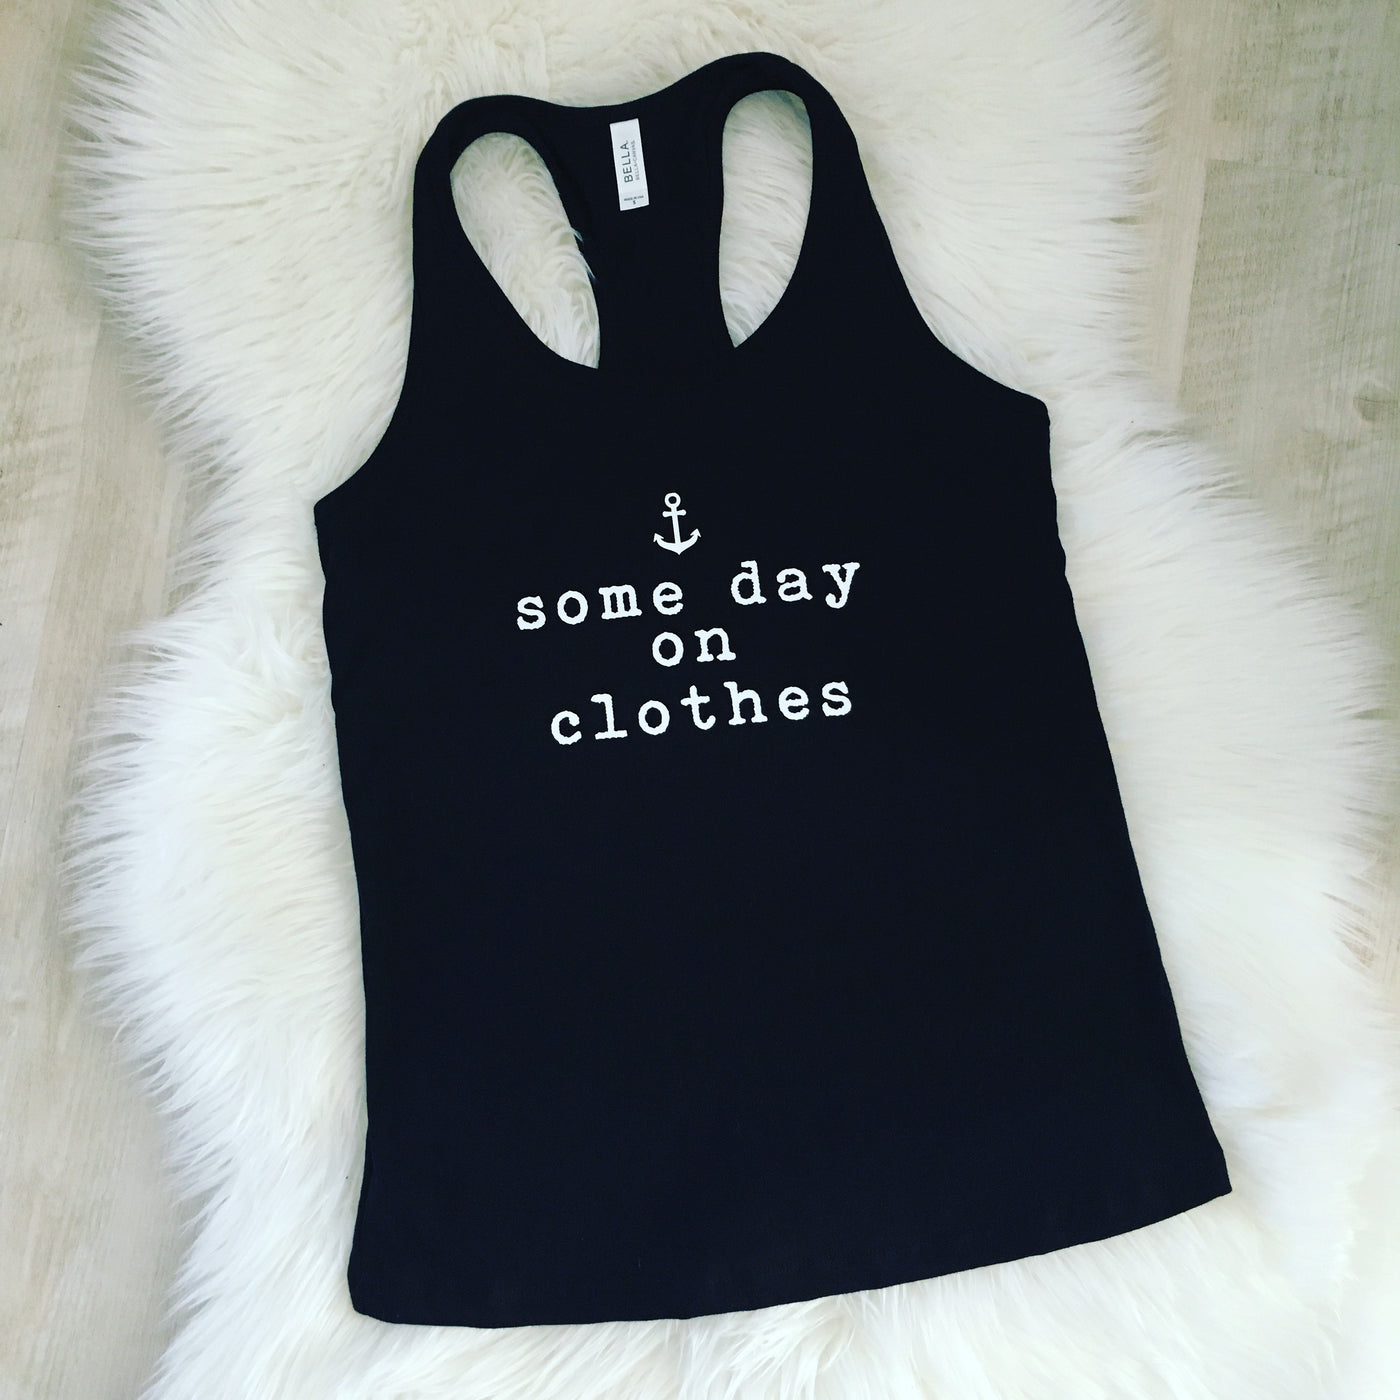 "Some Day on Clothes" Ladies' Tank Top